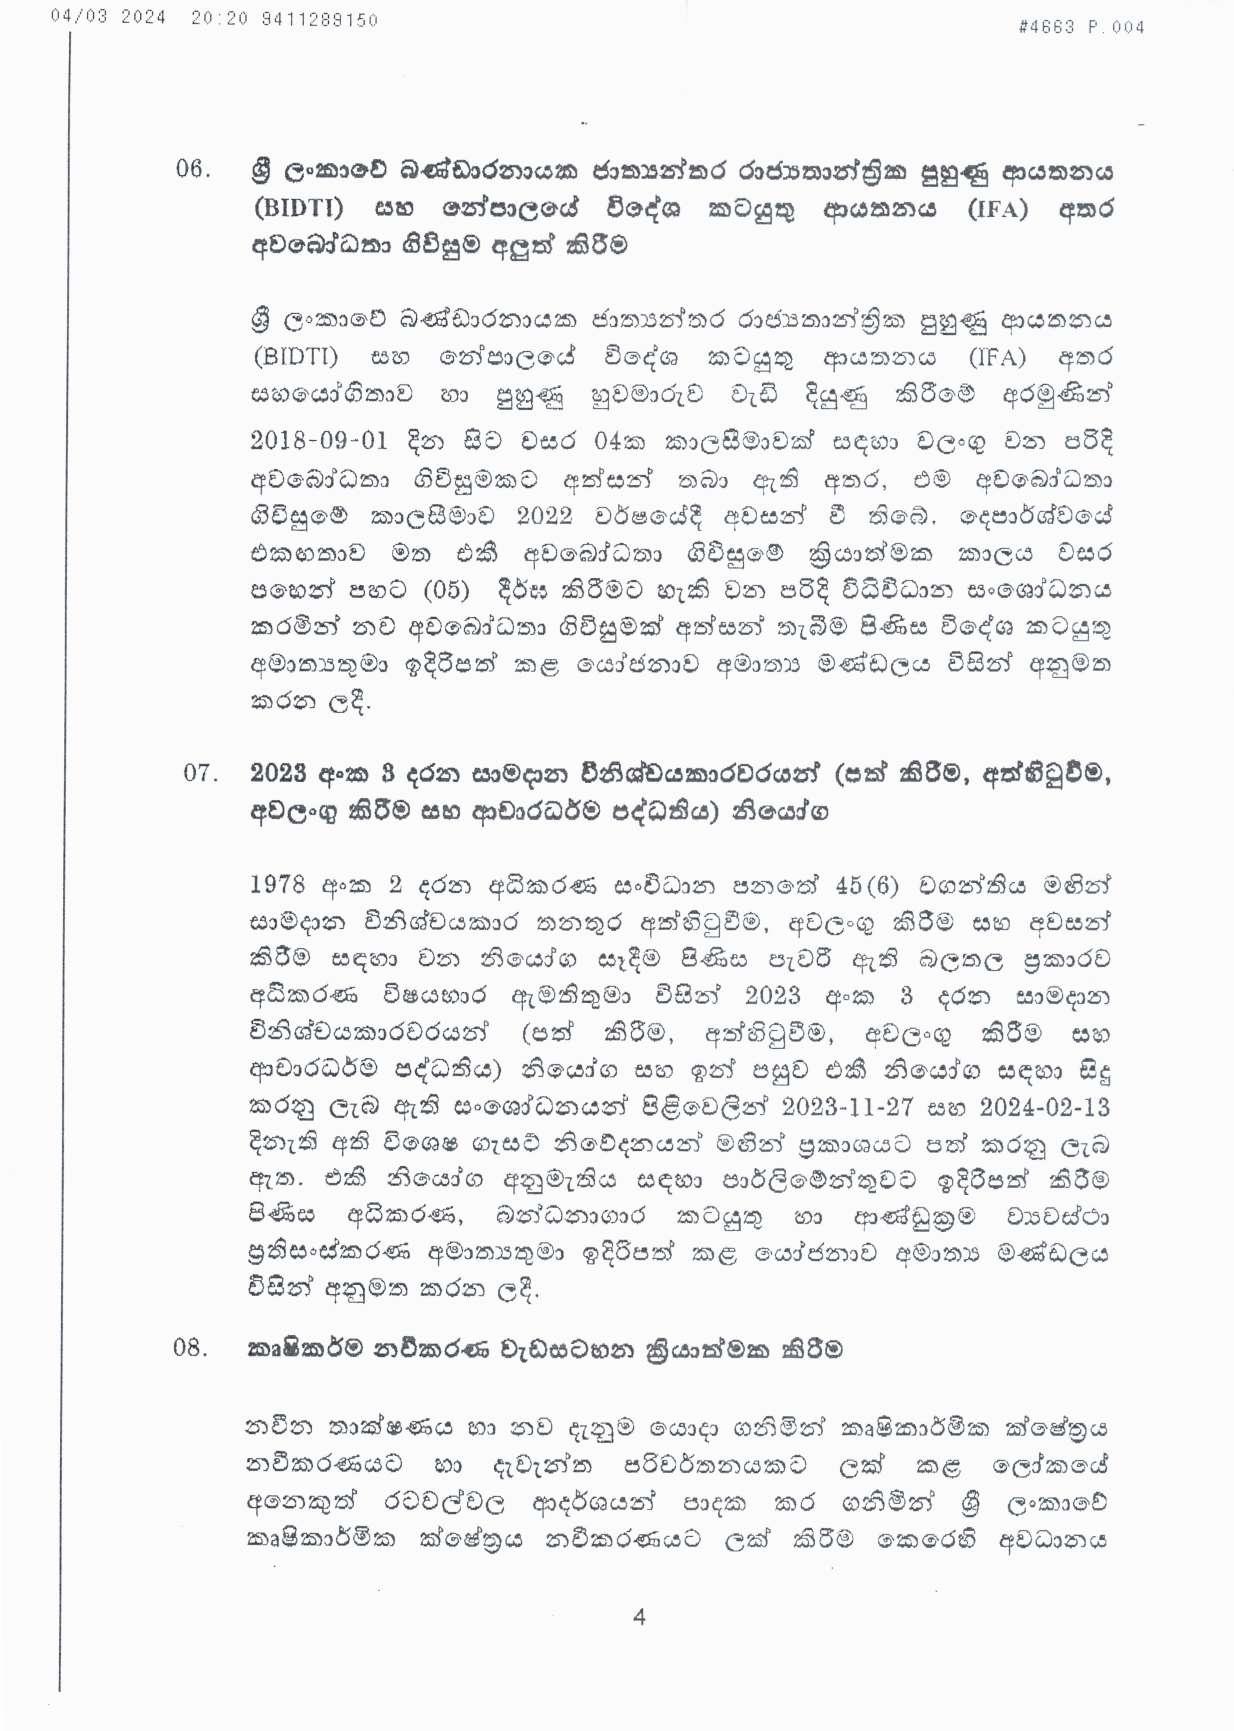 Cabinet Decision on 04.03.2024 page 004